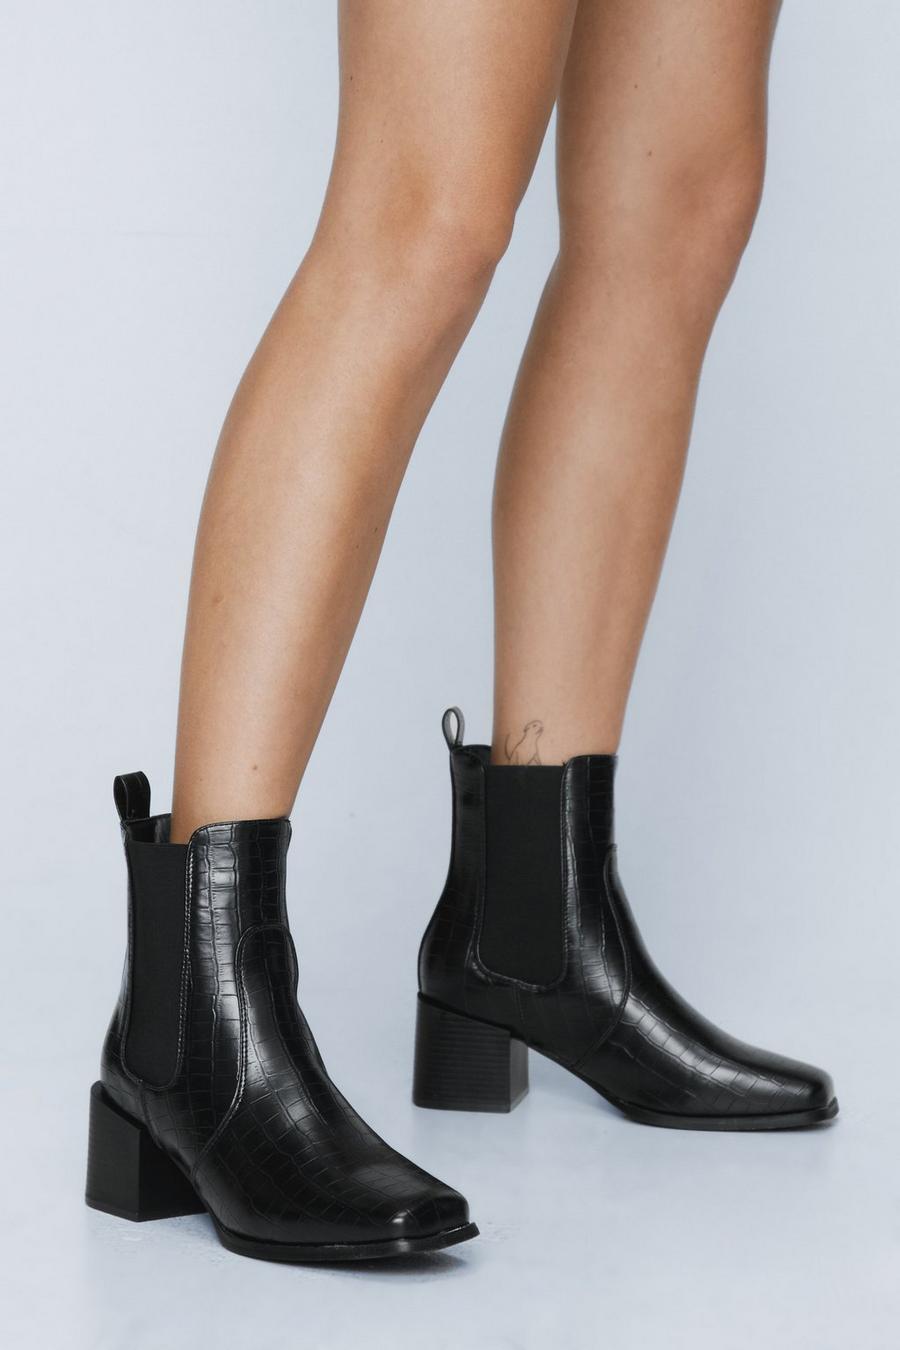 Croc Square Toe Heeled Ankle Boots